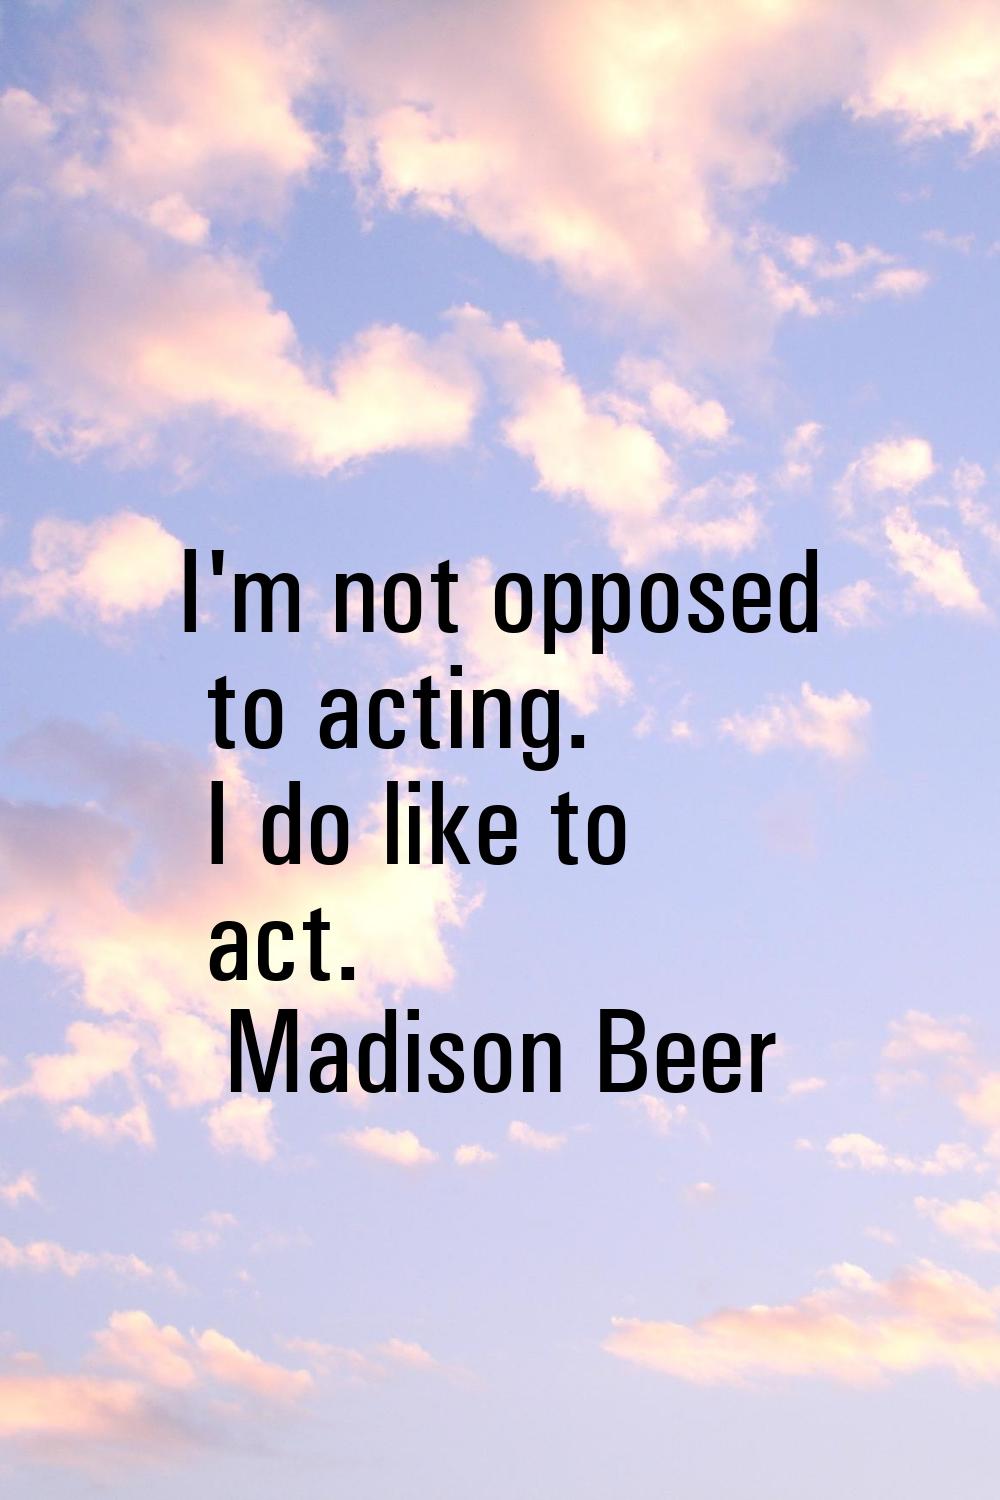 I'm not opposed to acting. I do like to act.